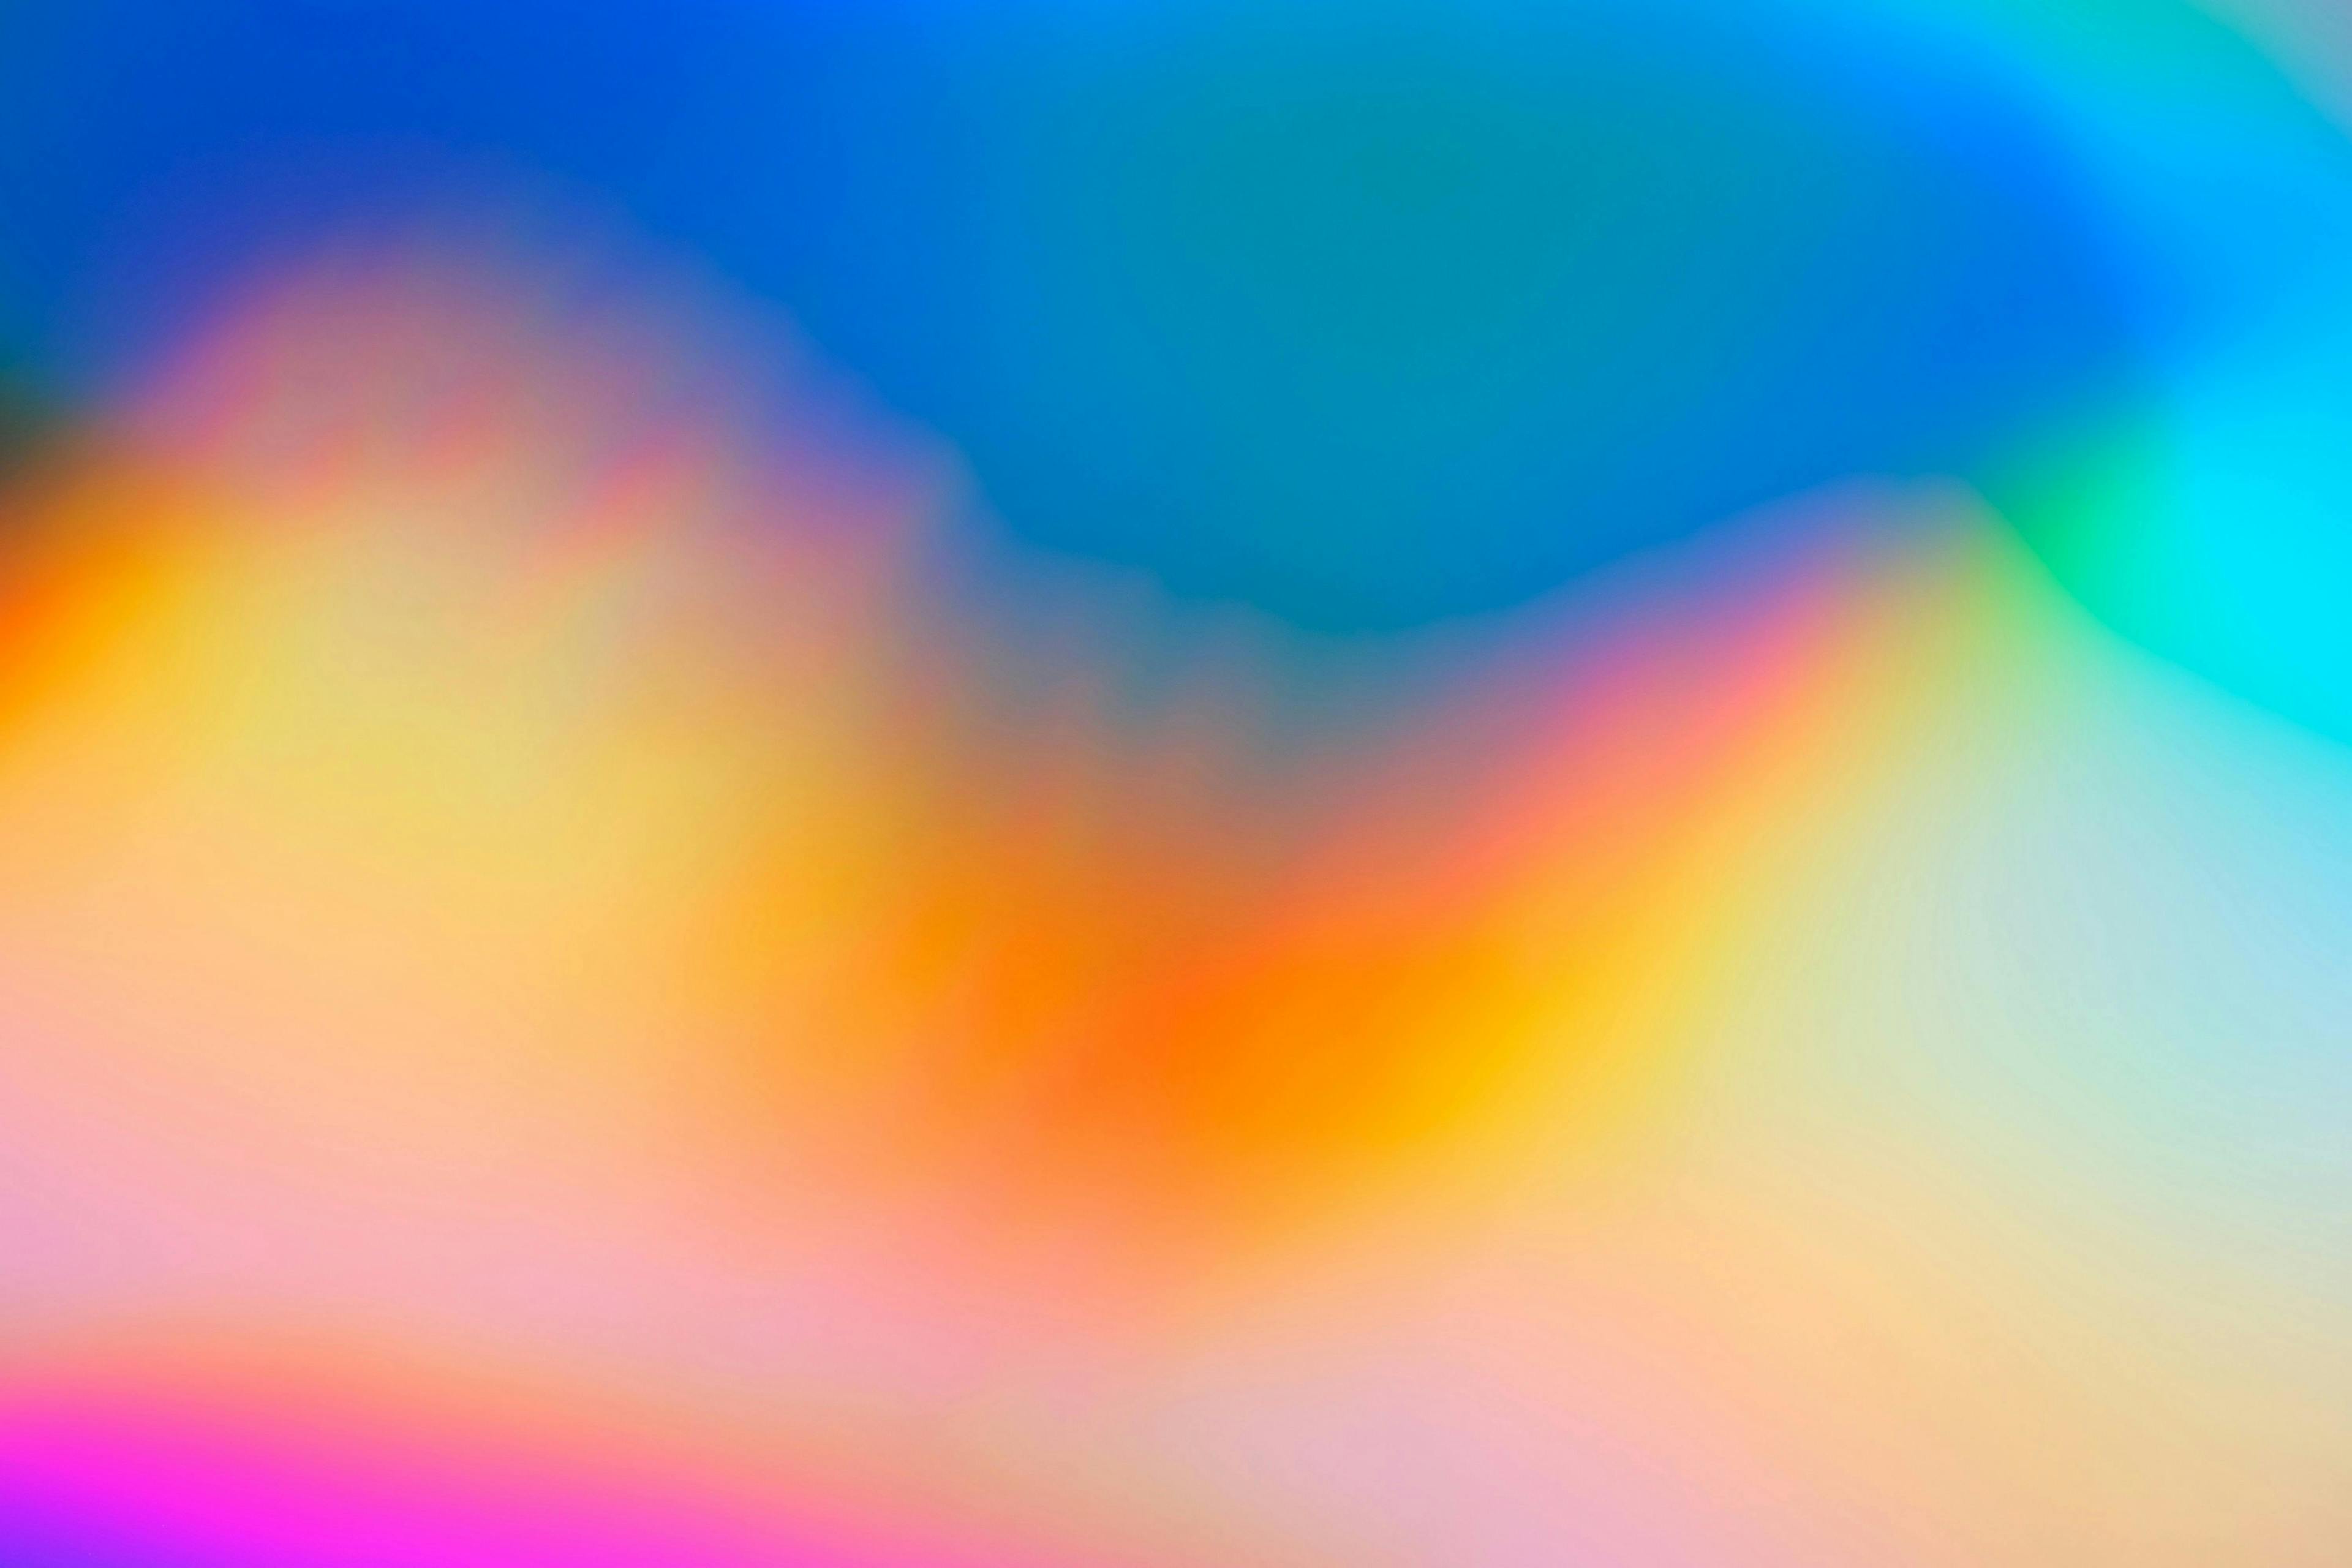 Abstract color gradient transitioning from deep blues to warm oranges, with magenta and yellow tones blending smoothly across the image, evoking a serene and vibrant atmosphere.